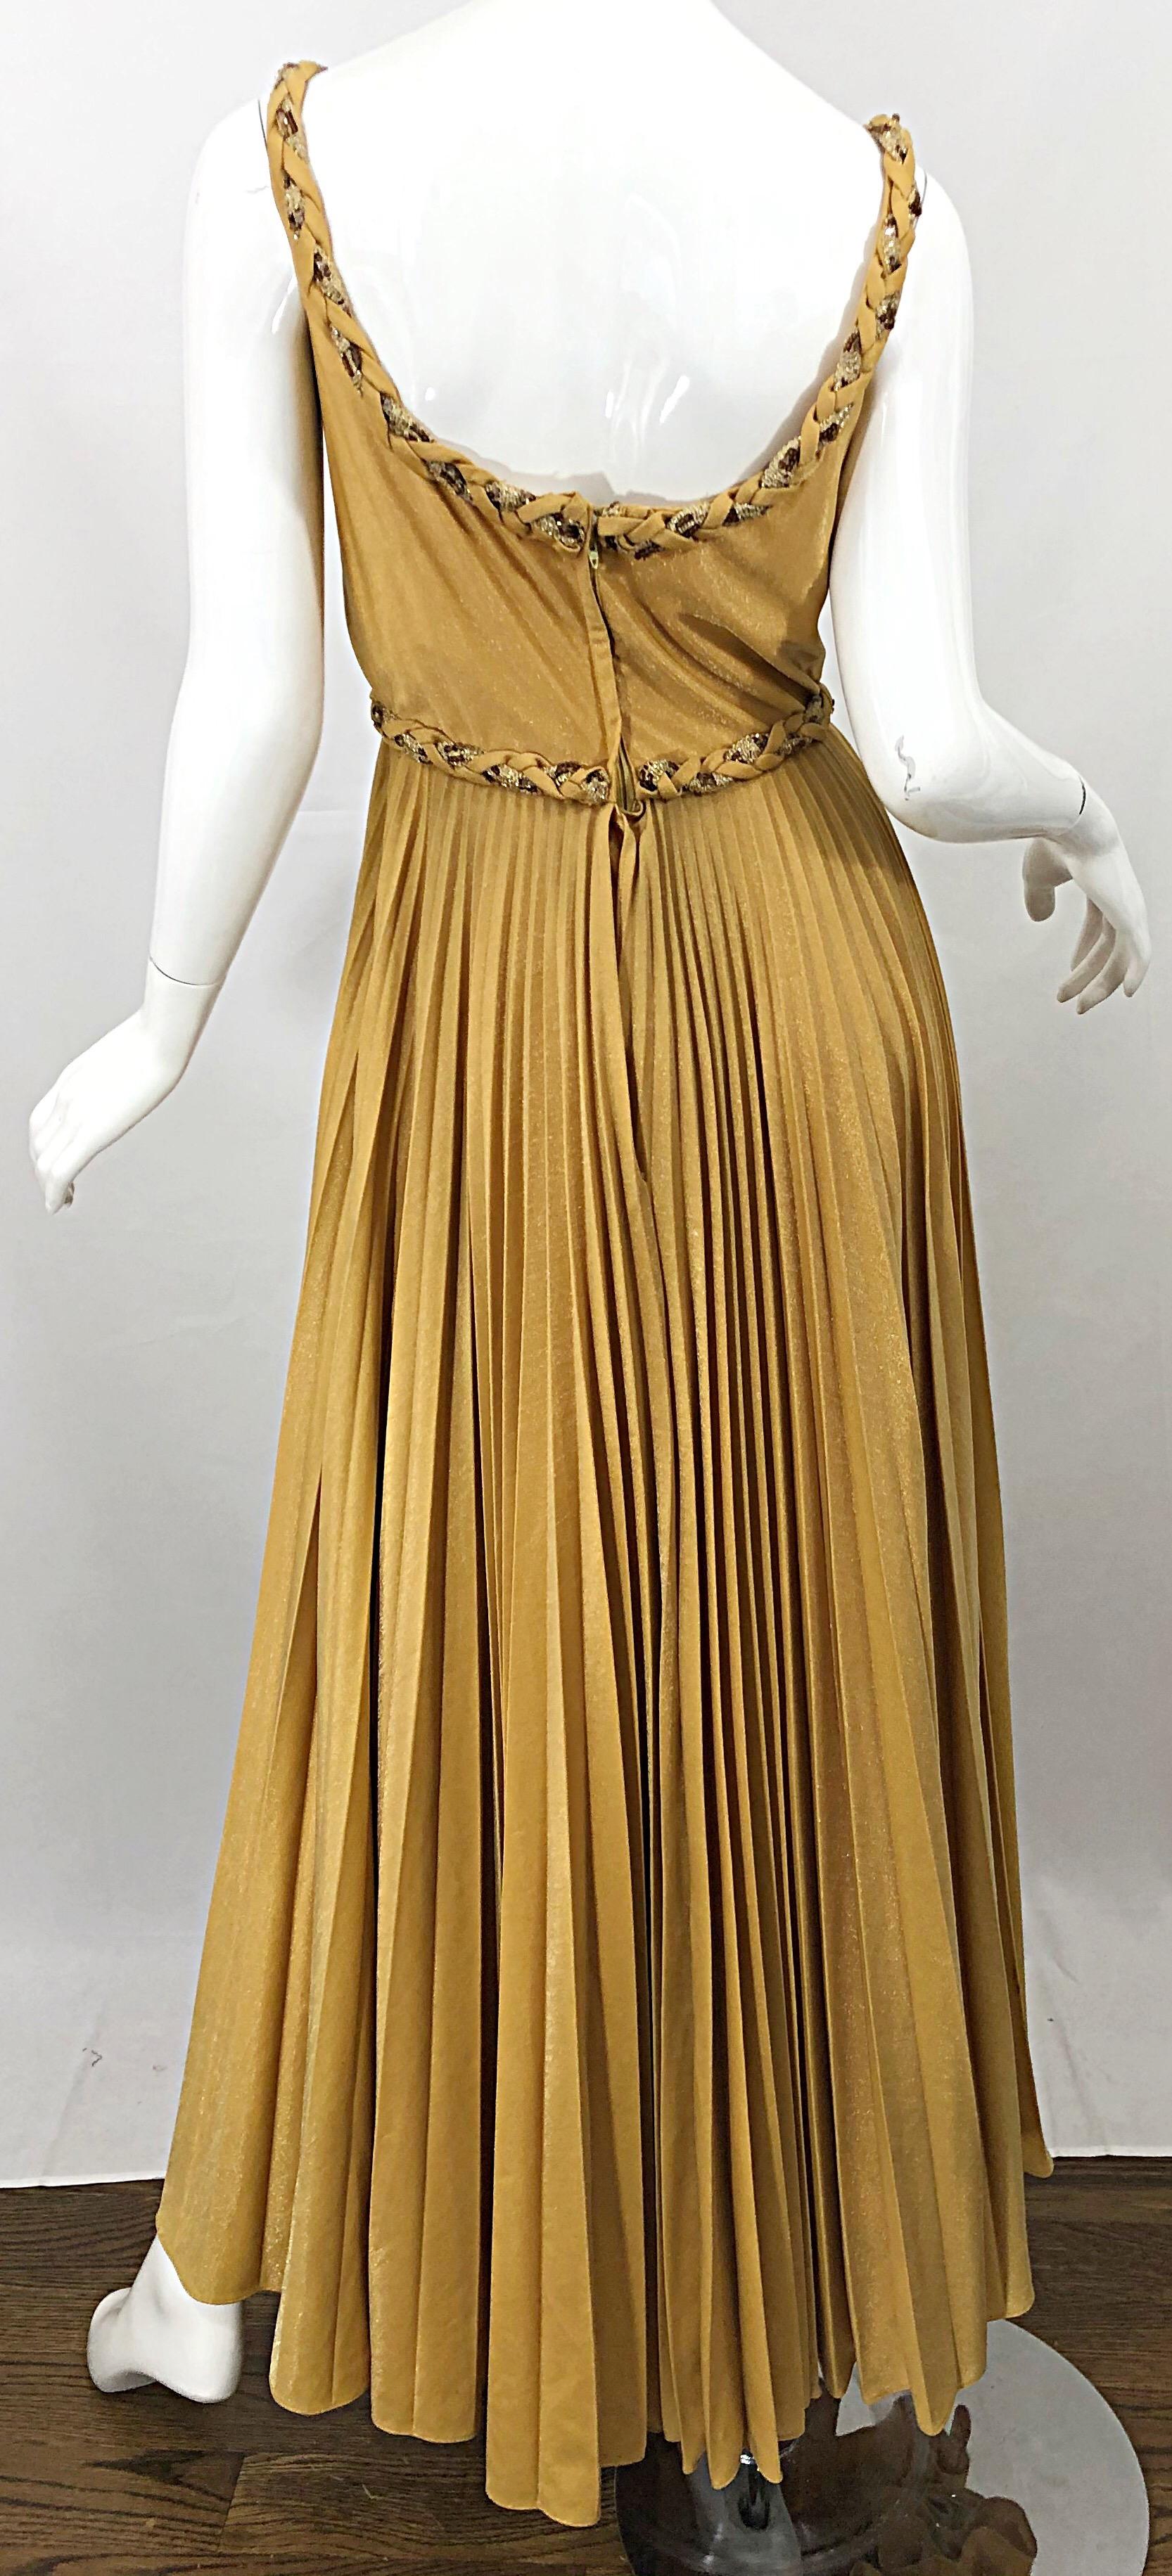 Emma Domb 1970s Gold Metallic Jersey Grecian Style Sequined Vintage 70s Gown For Sale 3